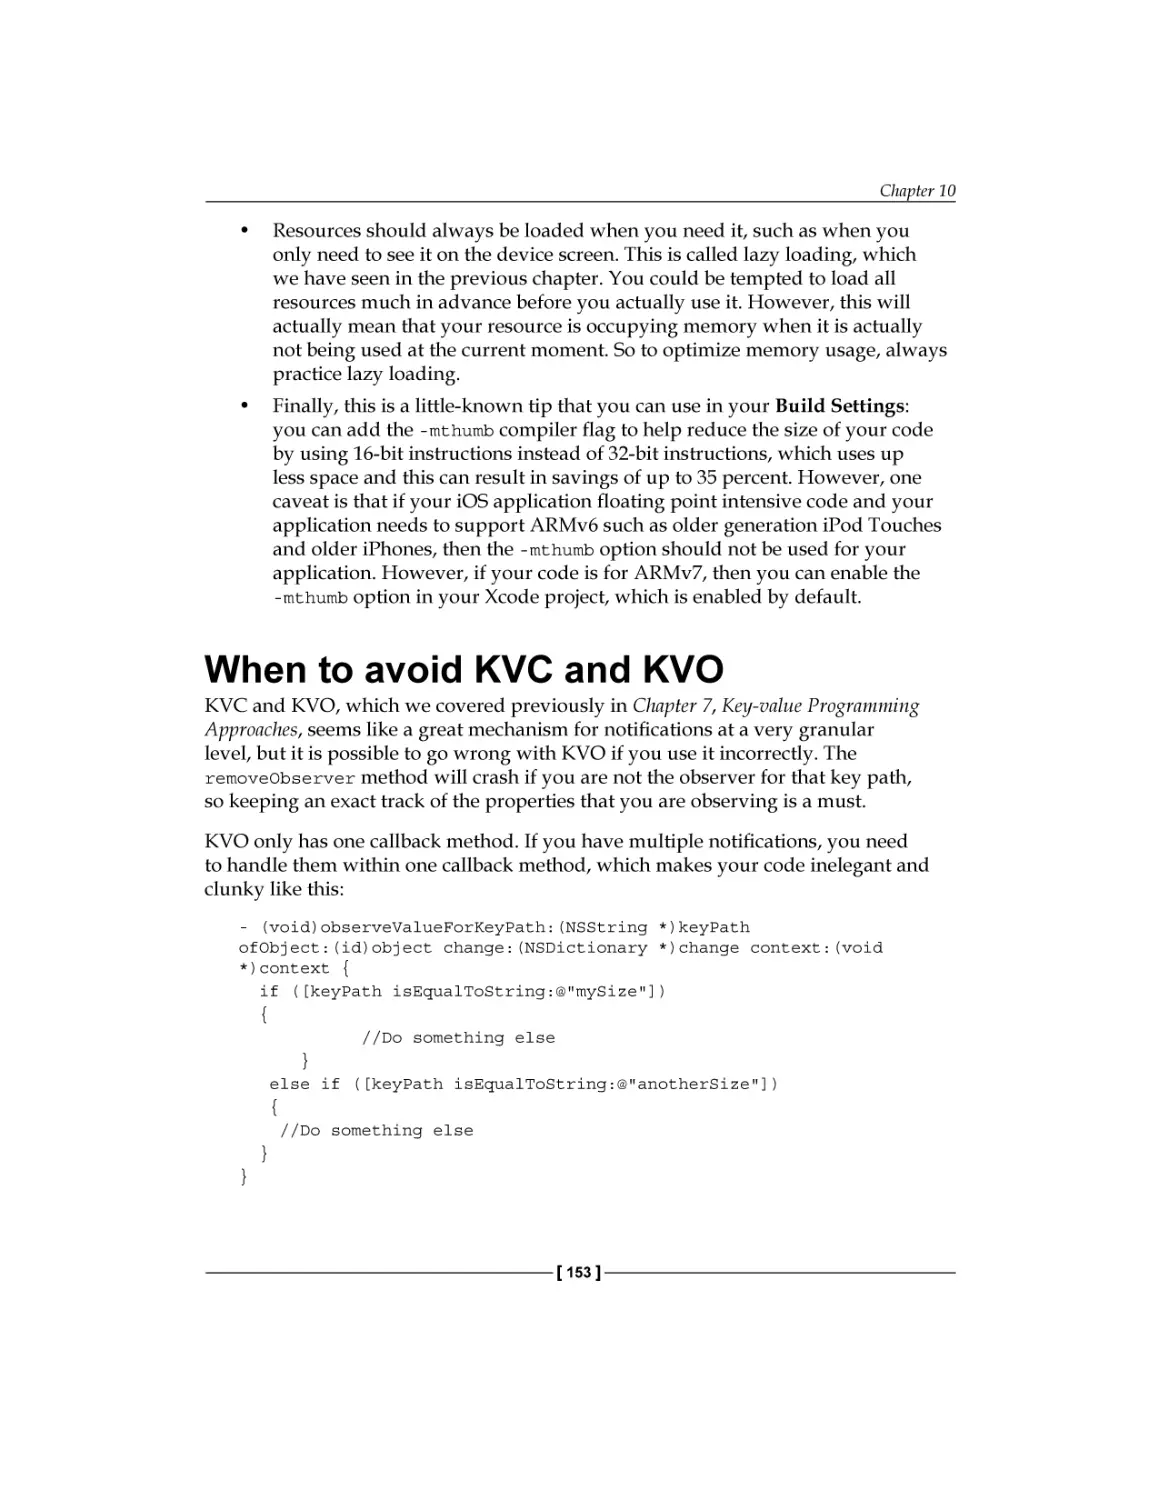 When to avoid KVC and KVO